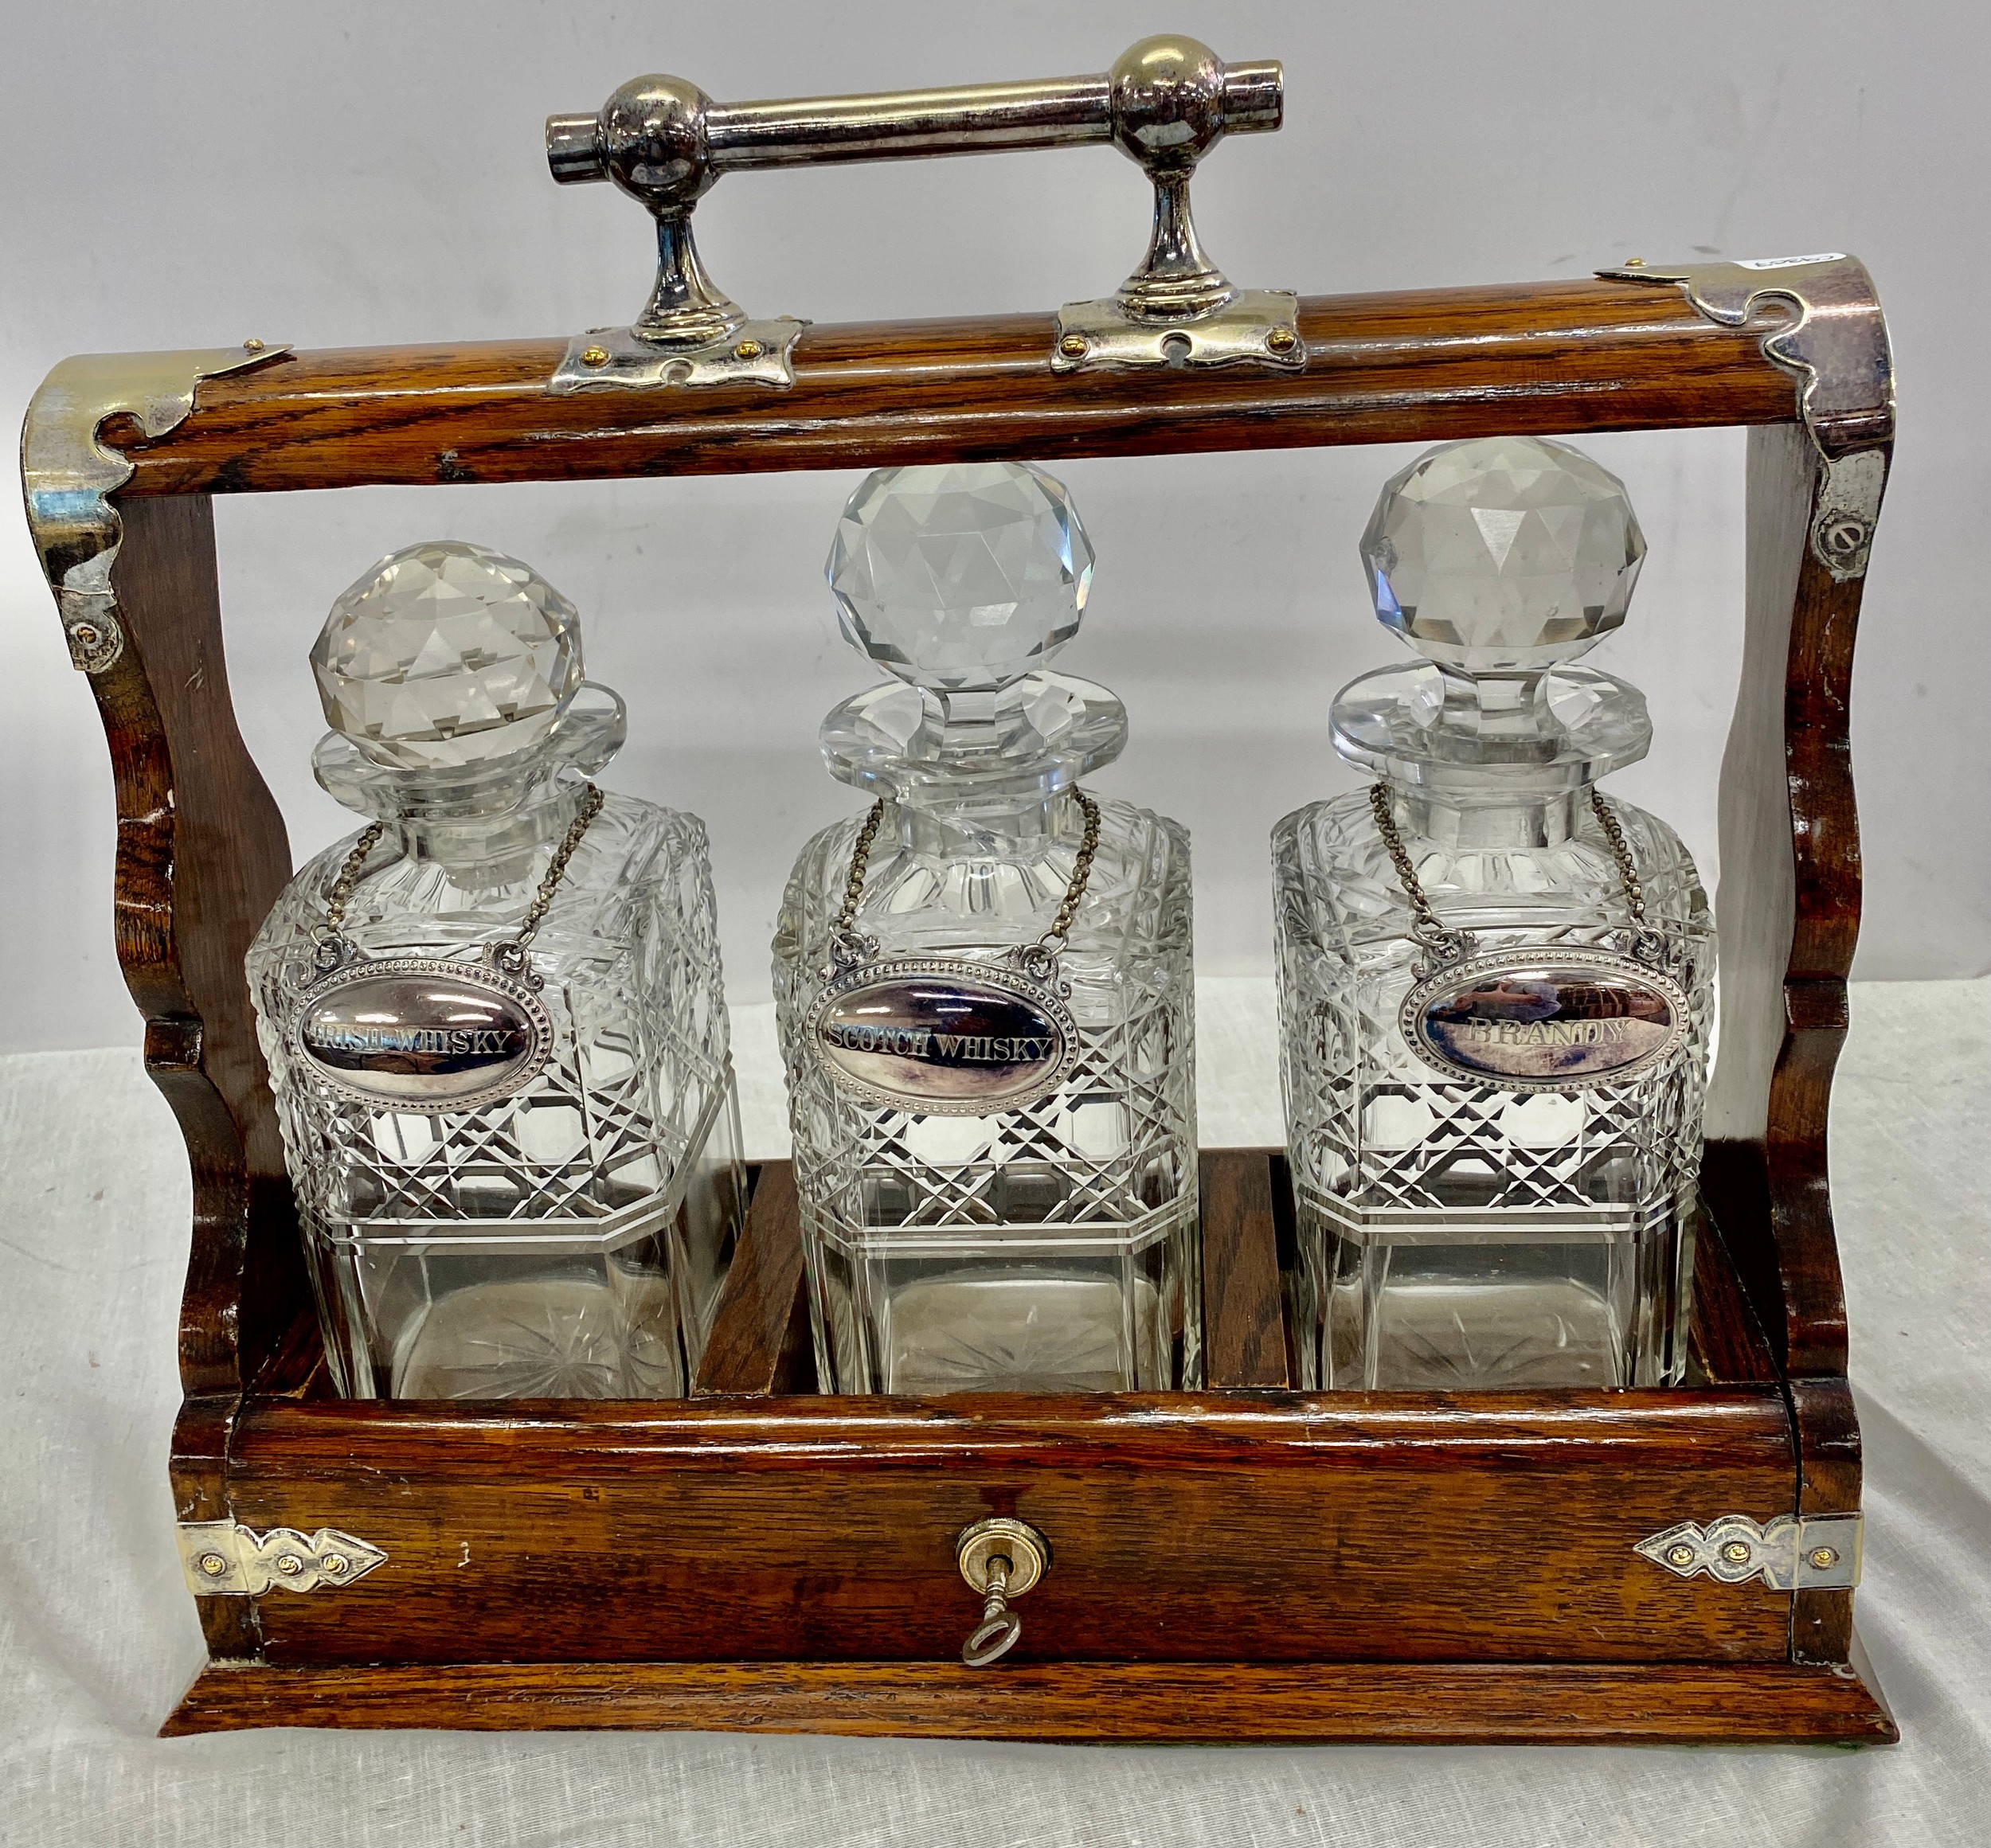 Vintage tantalus with silver plated drink labels, cut glass bottles, small damage to bottles